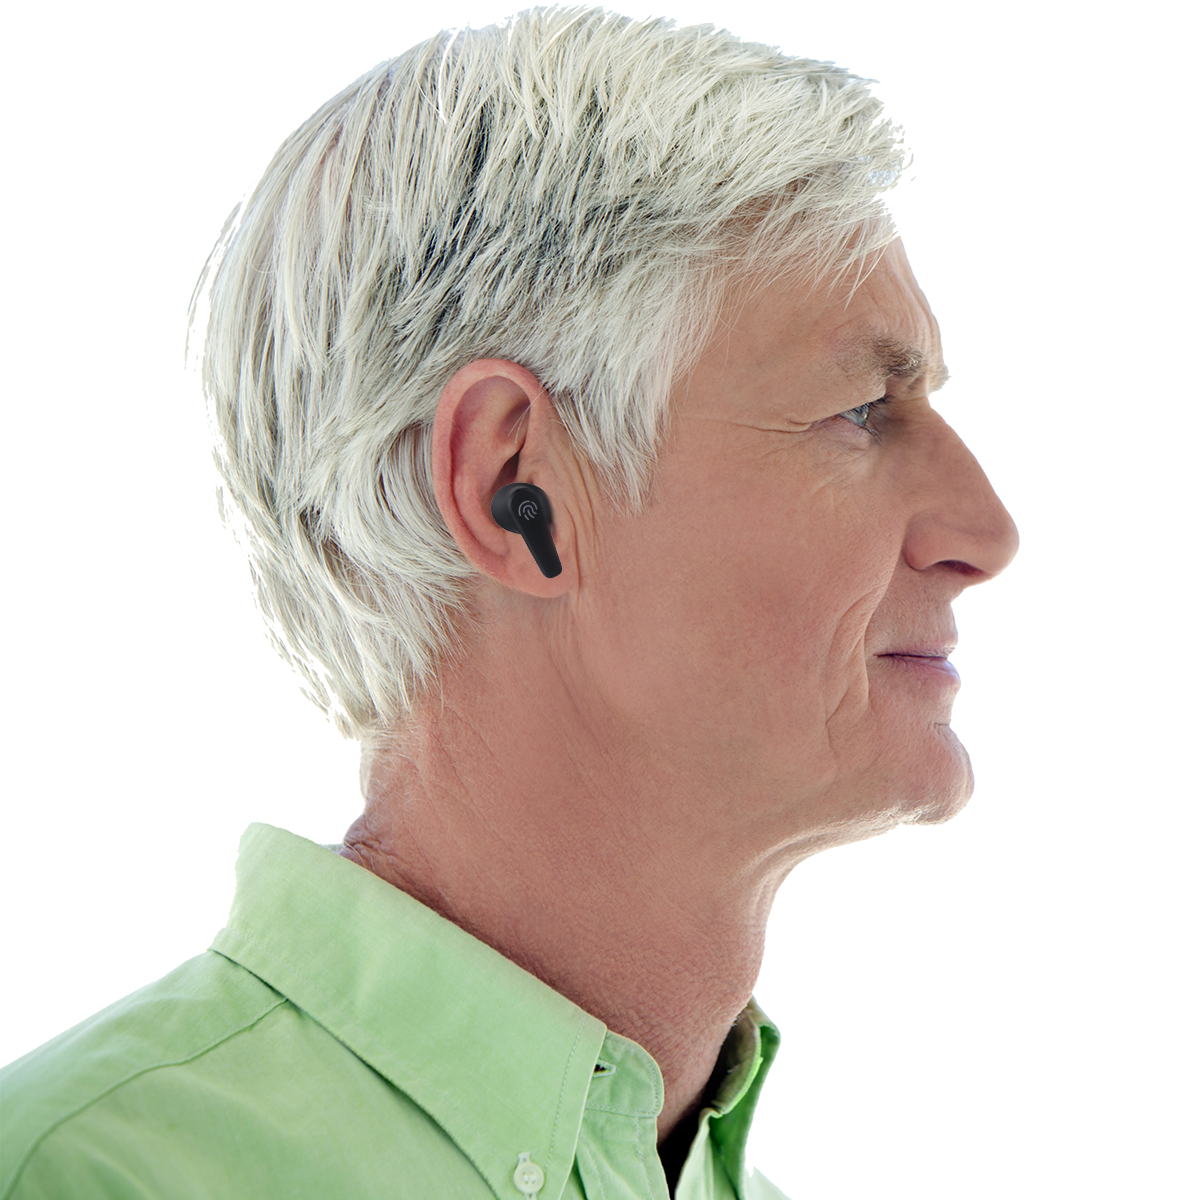 Fisdemo Seven Digital ITE Hearing Aids: Rechargeable, Bluetooth, Self-Fitting & Customizable with APP